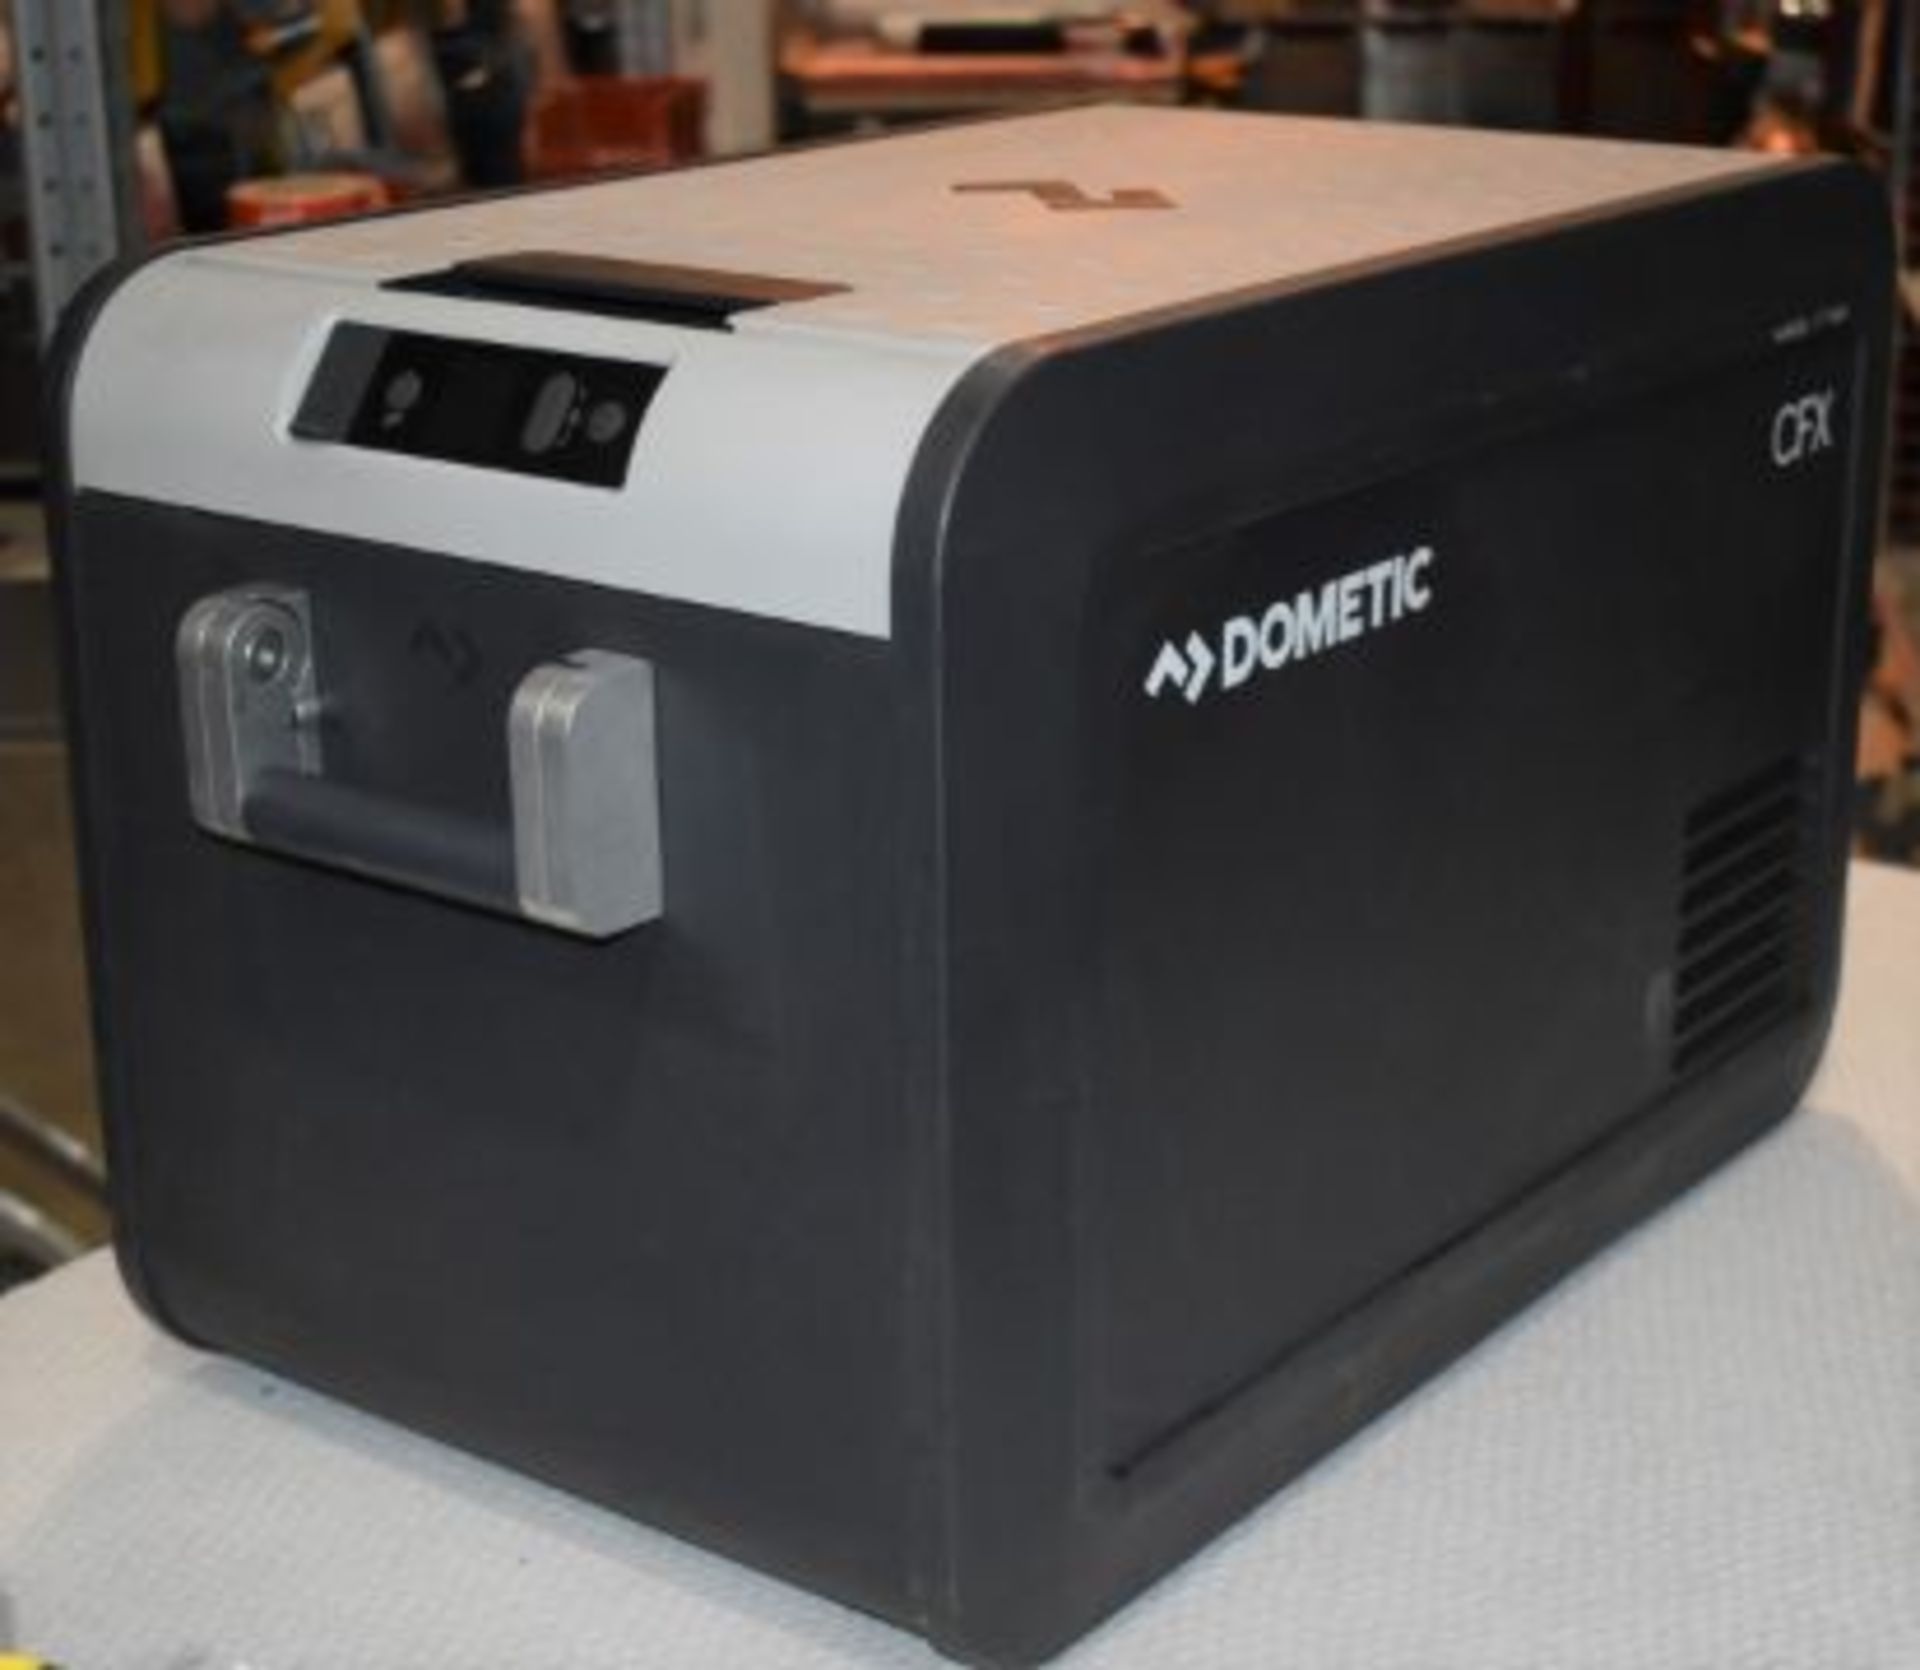 1 x Dometic CFX3 35 Portable 32l Compressor Cooler and Freezer - Perfect For Cooling The Christmas - Image 4 of 9